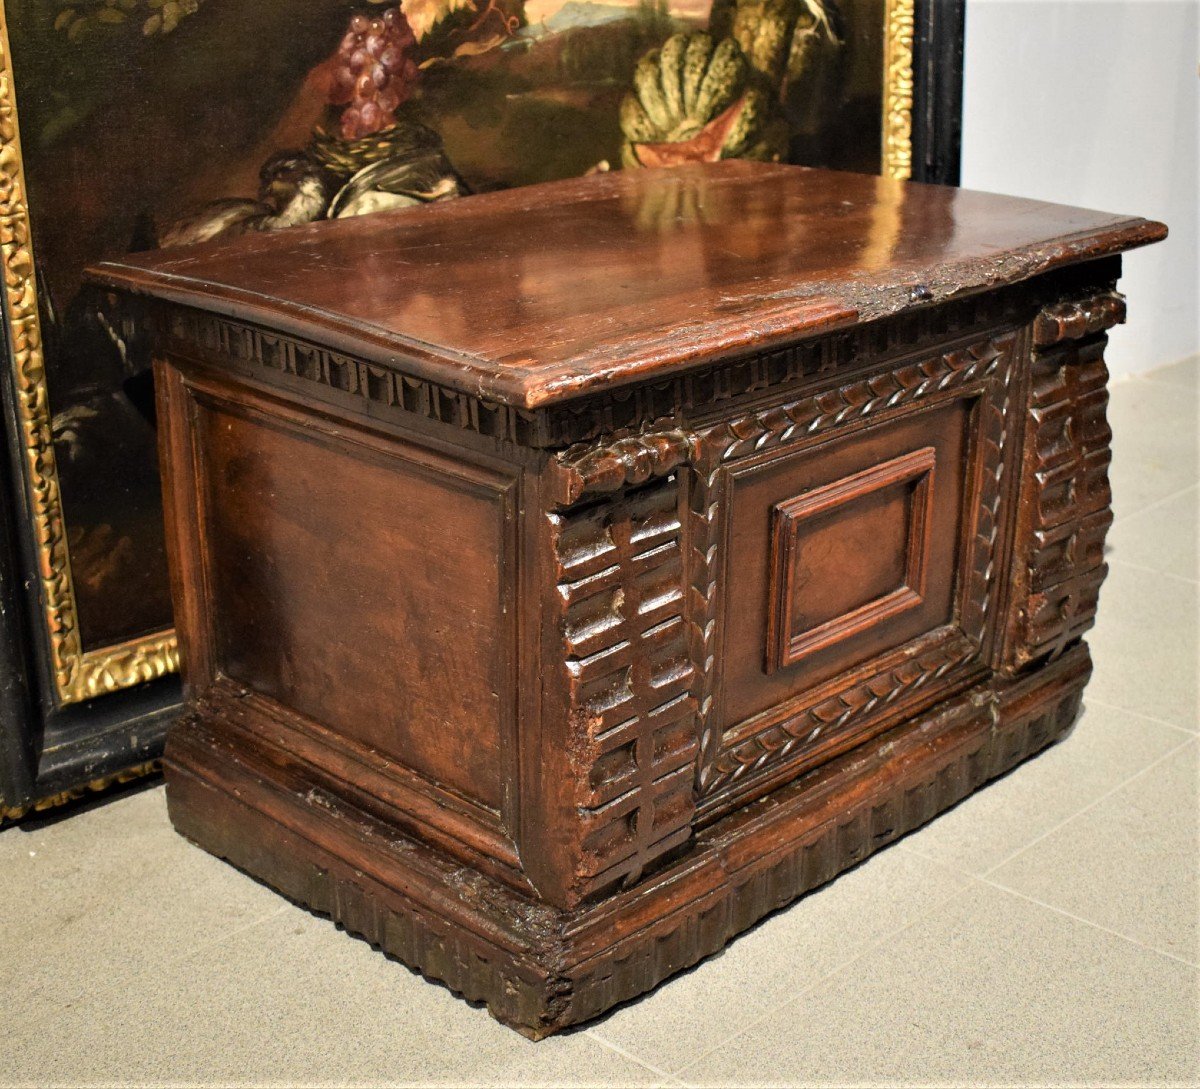 Small Walnut Chest From The End Of The XVIth Century, Northern Italy-photo-4